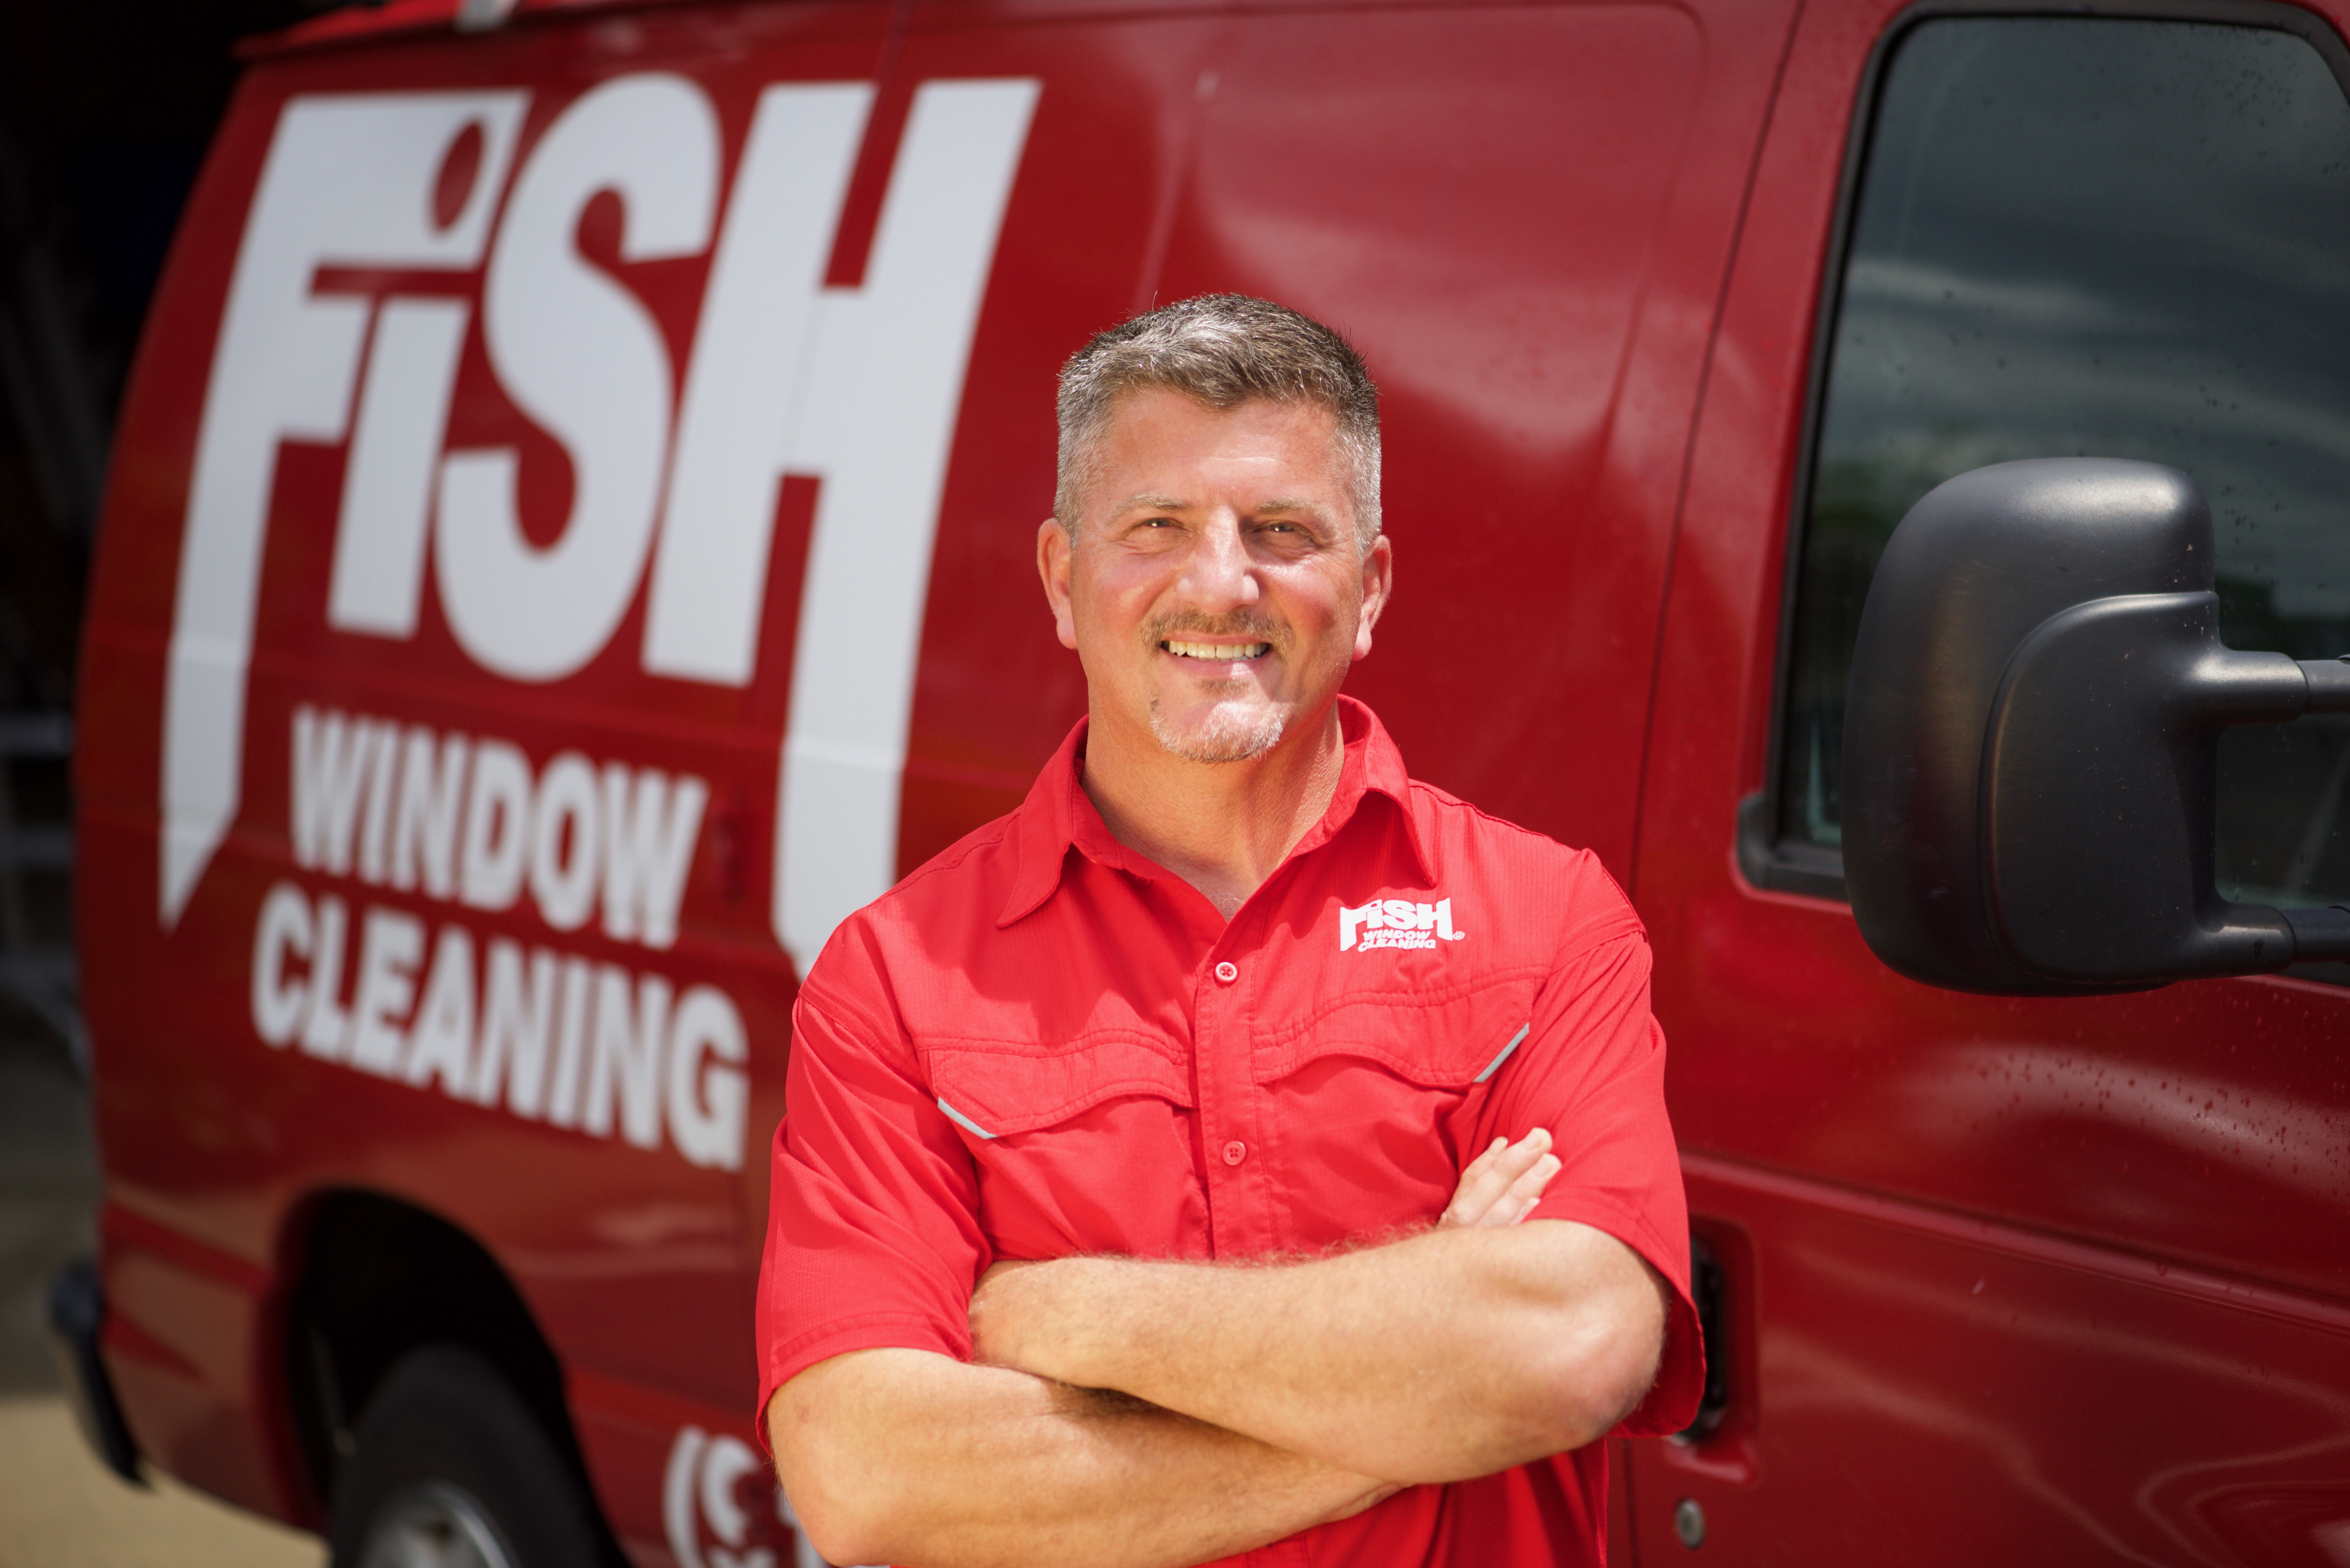 Fish Window Cleaning Franchise Owner